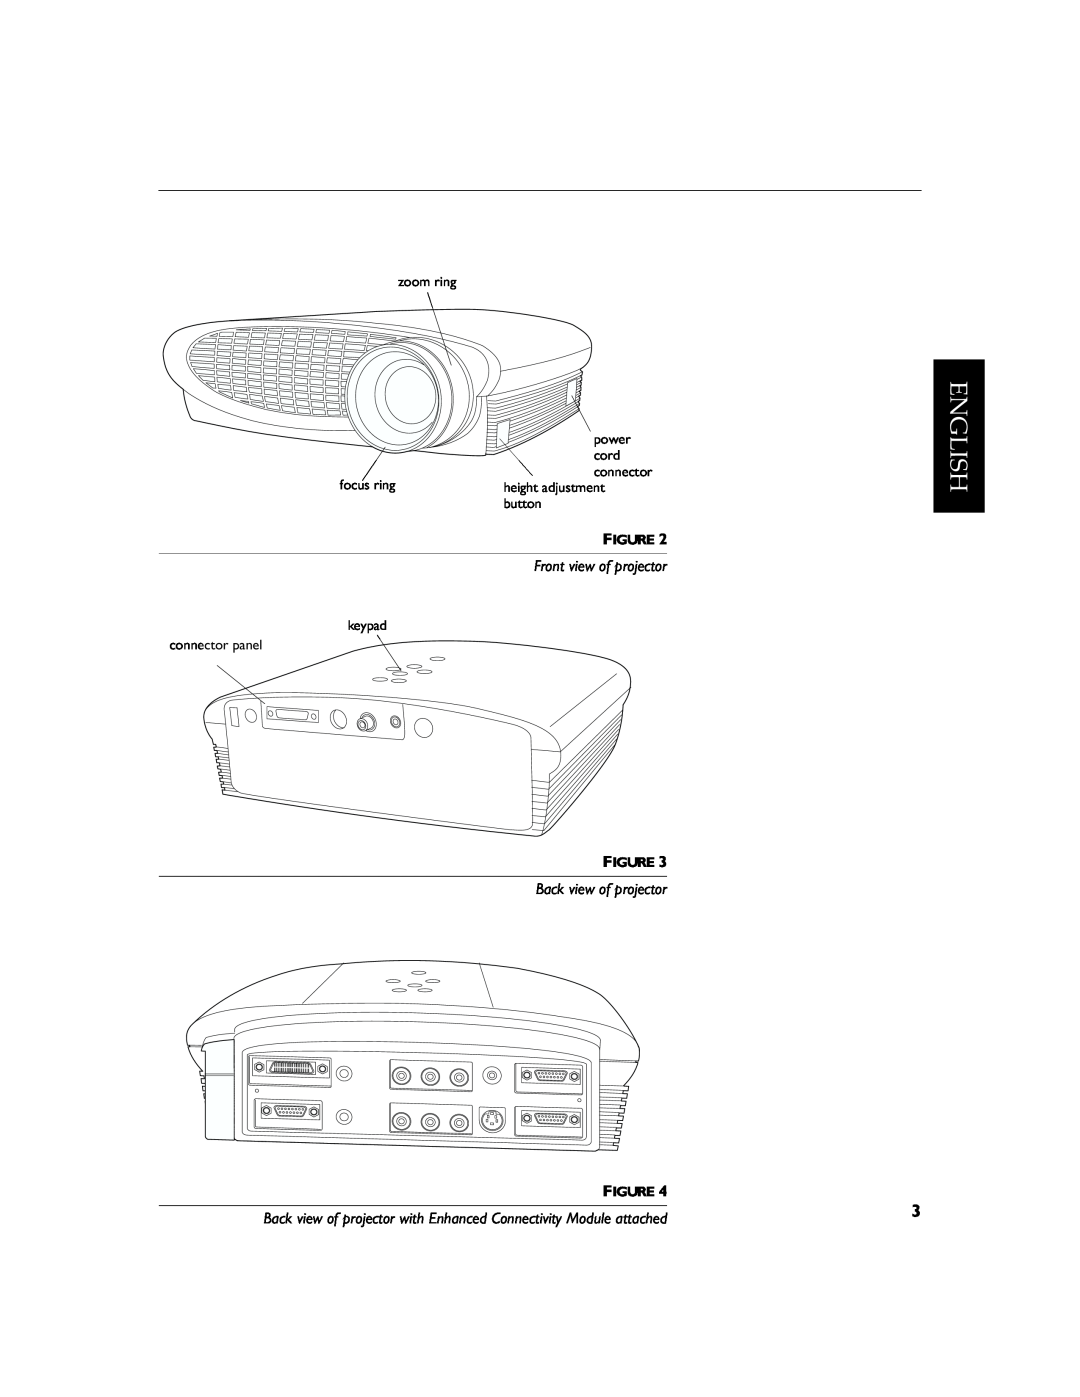 InFocus LS110 manual 1*/,6+, Front view of projector, Back view of projector 